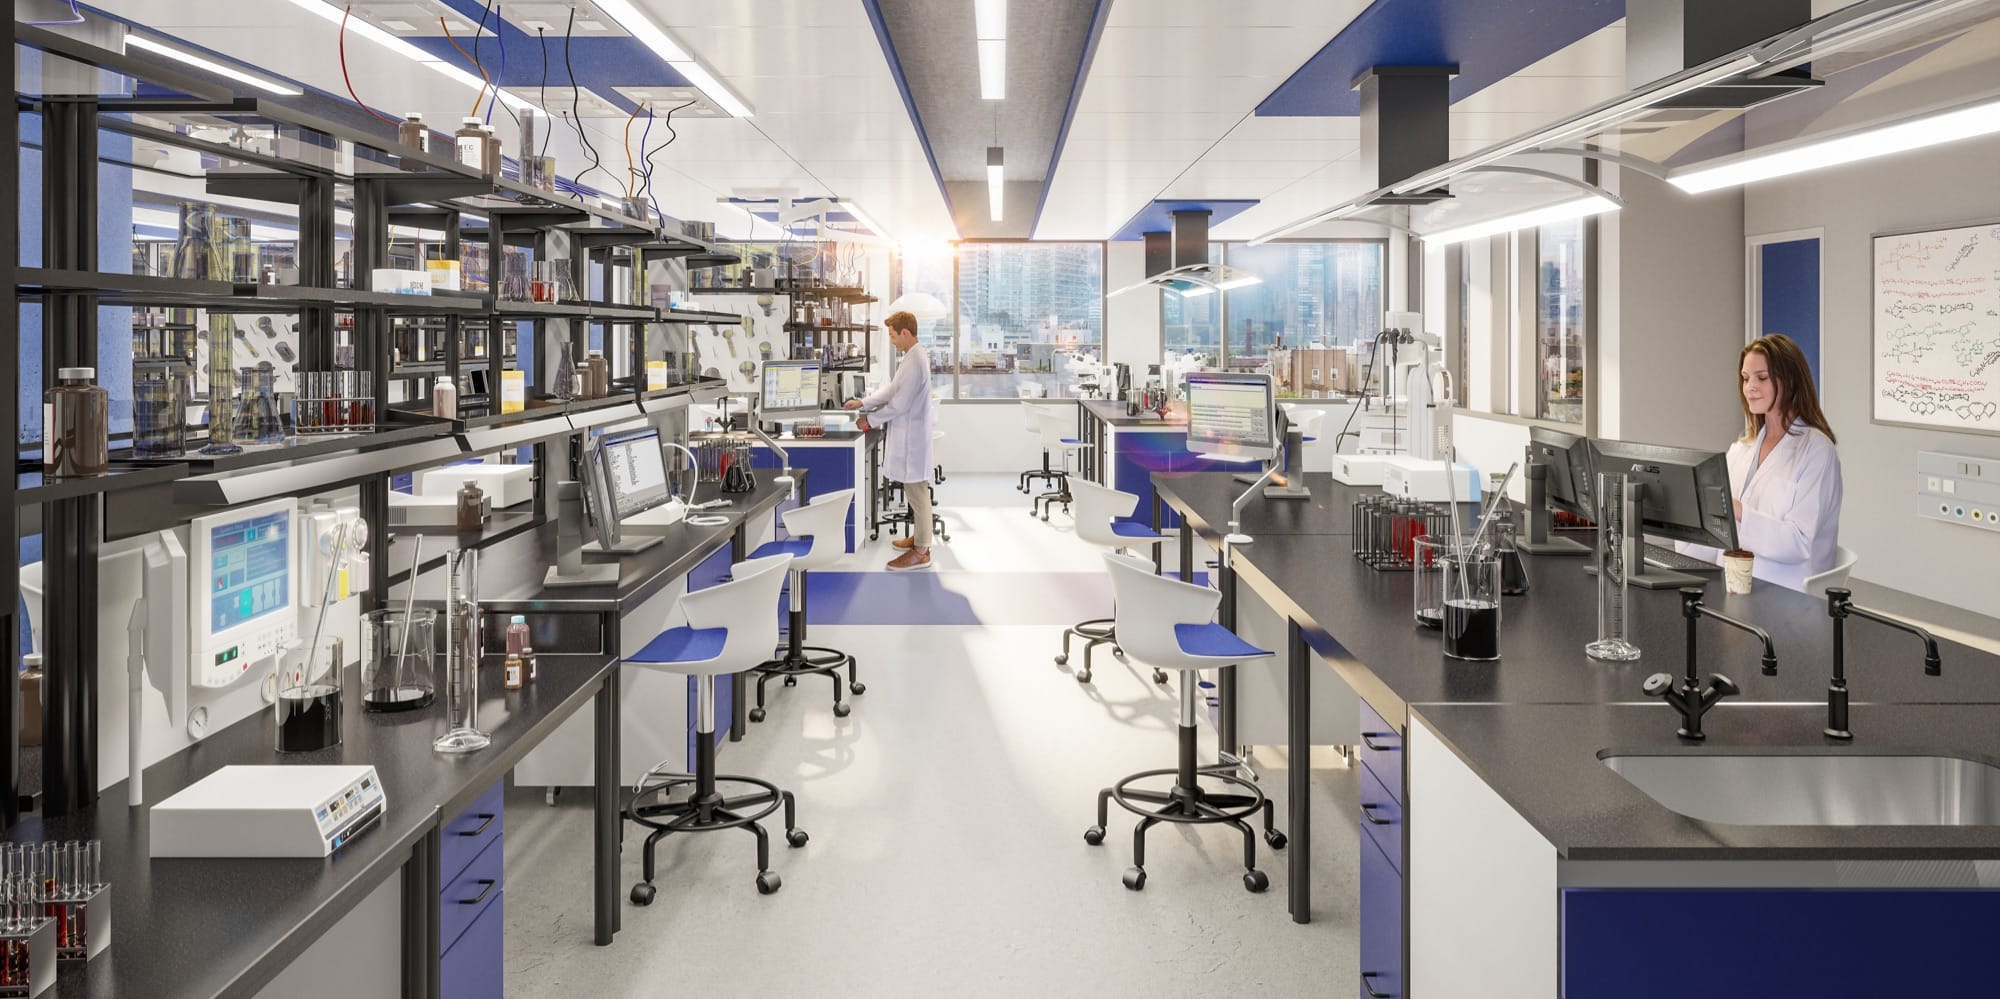 Scientists work in state-of-the-art lab space at Innolabs